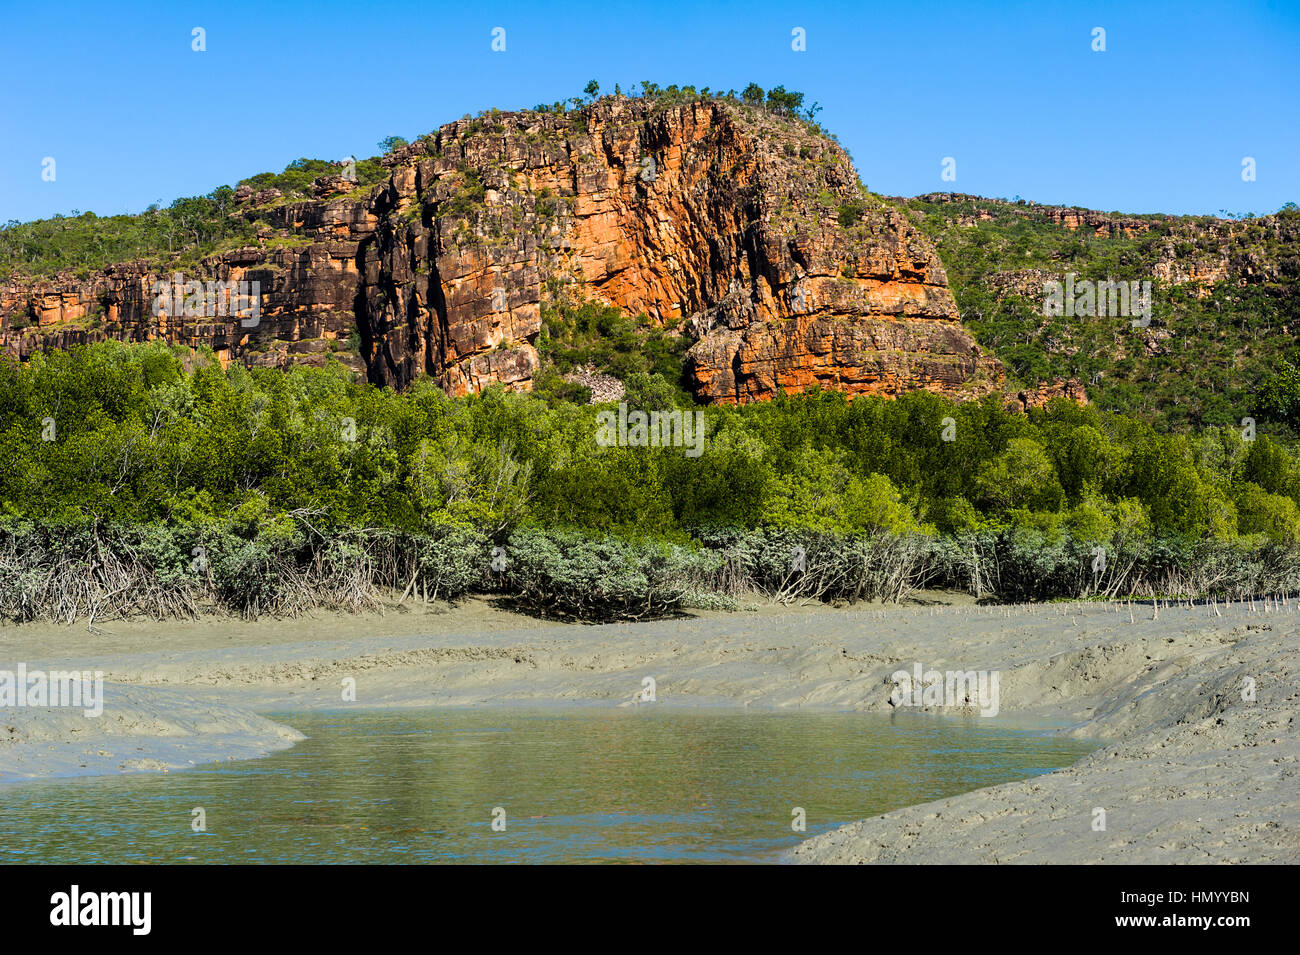 A mangrove forest tributary channel beneath a sandstone cliff at low tide. Stock Photo